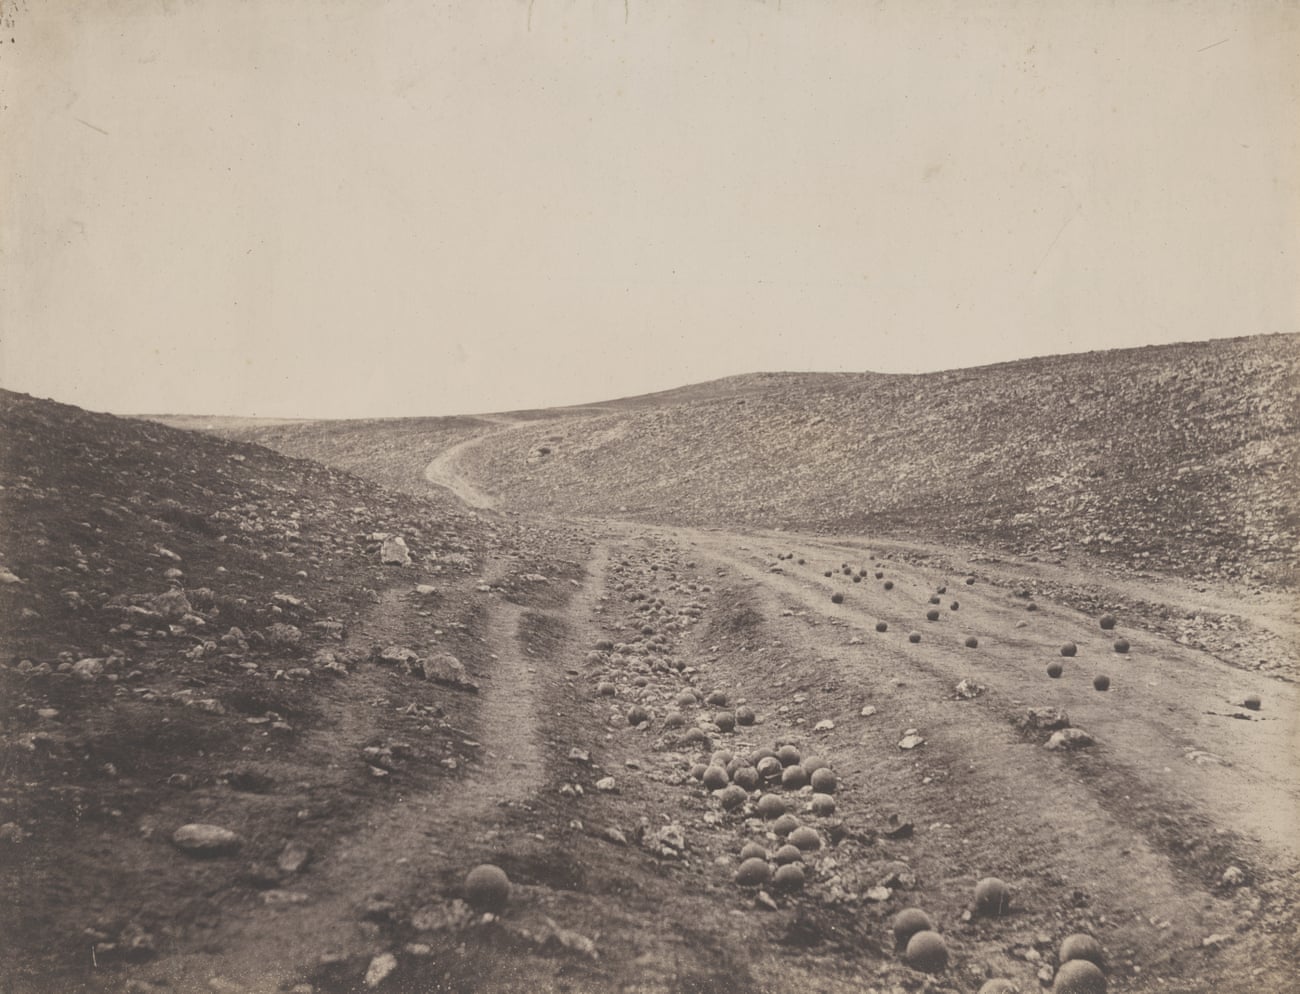 The Valley of the Shadow of Death, by Roger Fenton.